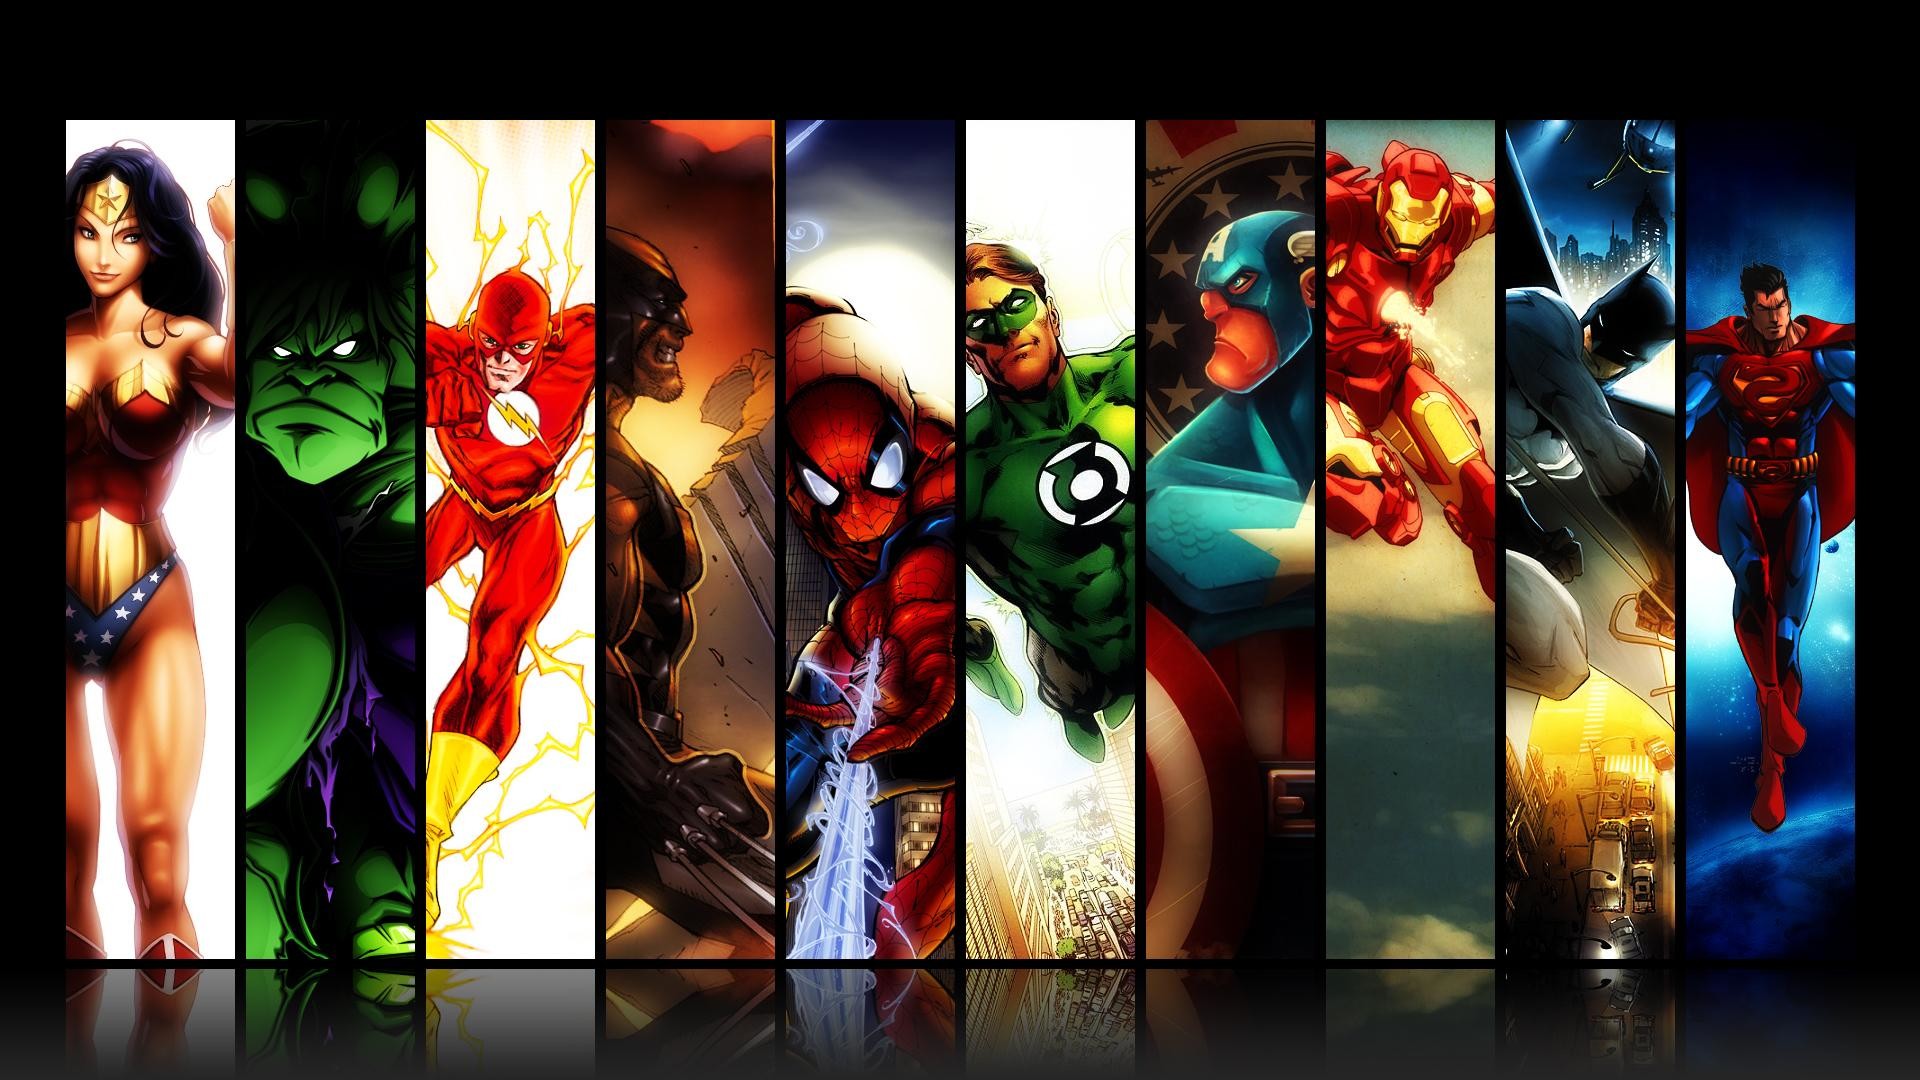 1920x1080 ... dc superheroes wallpapers 28 wallpapers adorable wallpapers ...